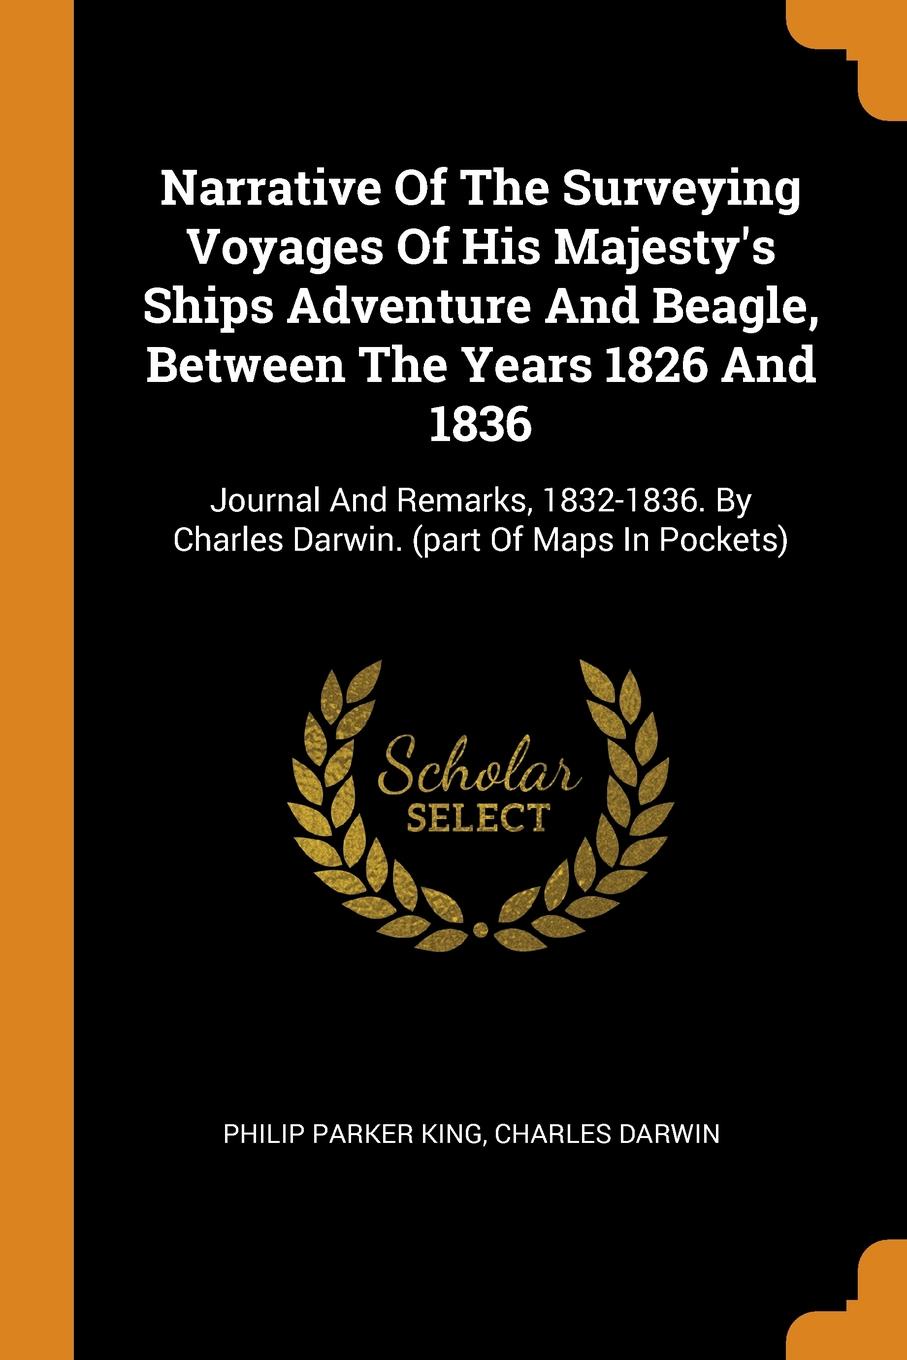 Narrative Of The Surveying Voyages Of His Majesty.s Ships Adventure And Beagle, Between The Years 1826 And 1836. Journal And Remarks, 1832-1836. By Charles Darwin. (part Of Maps In Pockets)